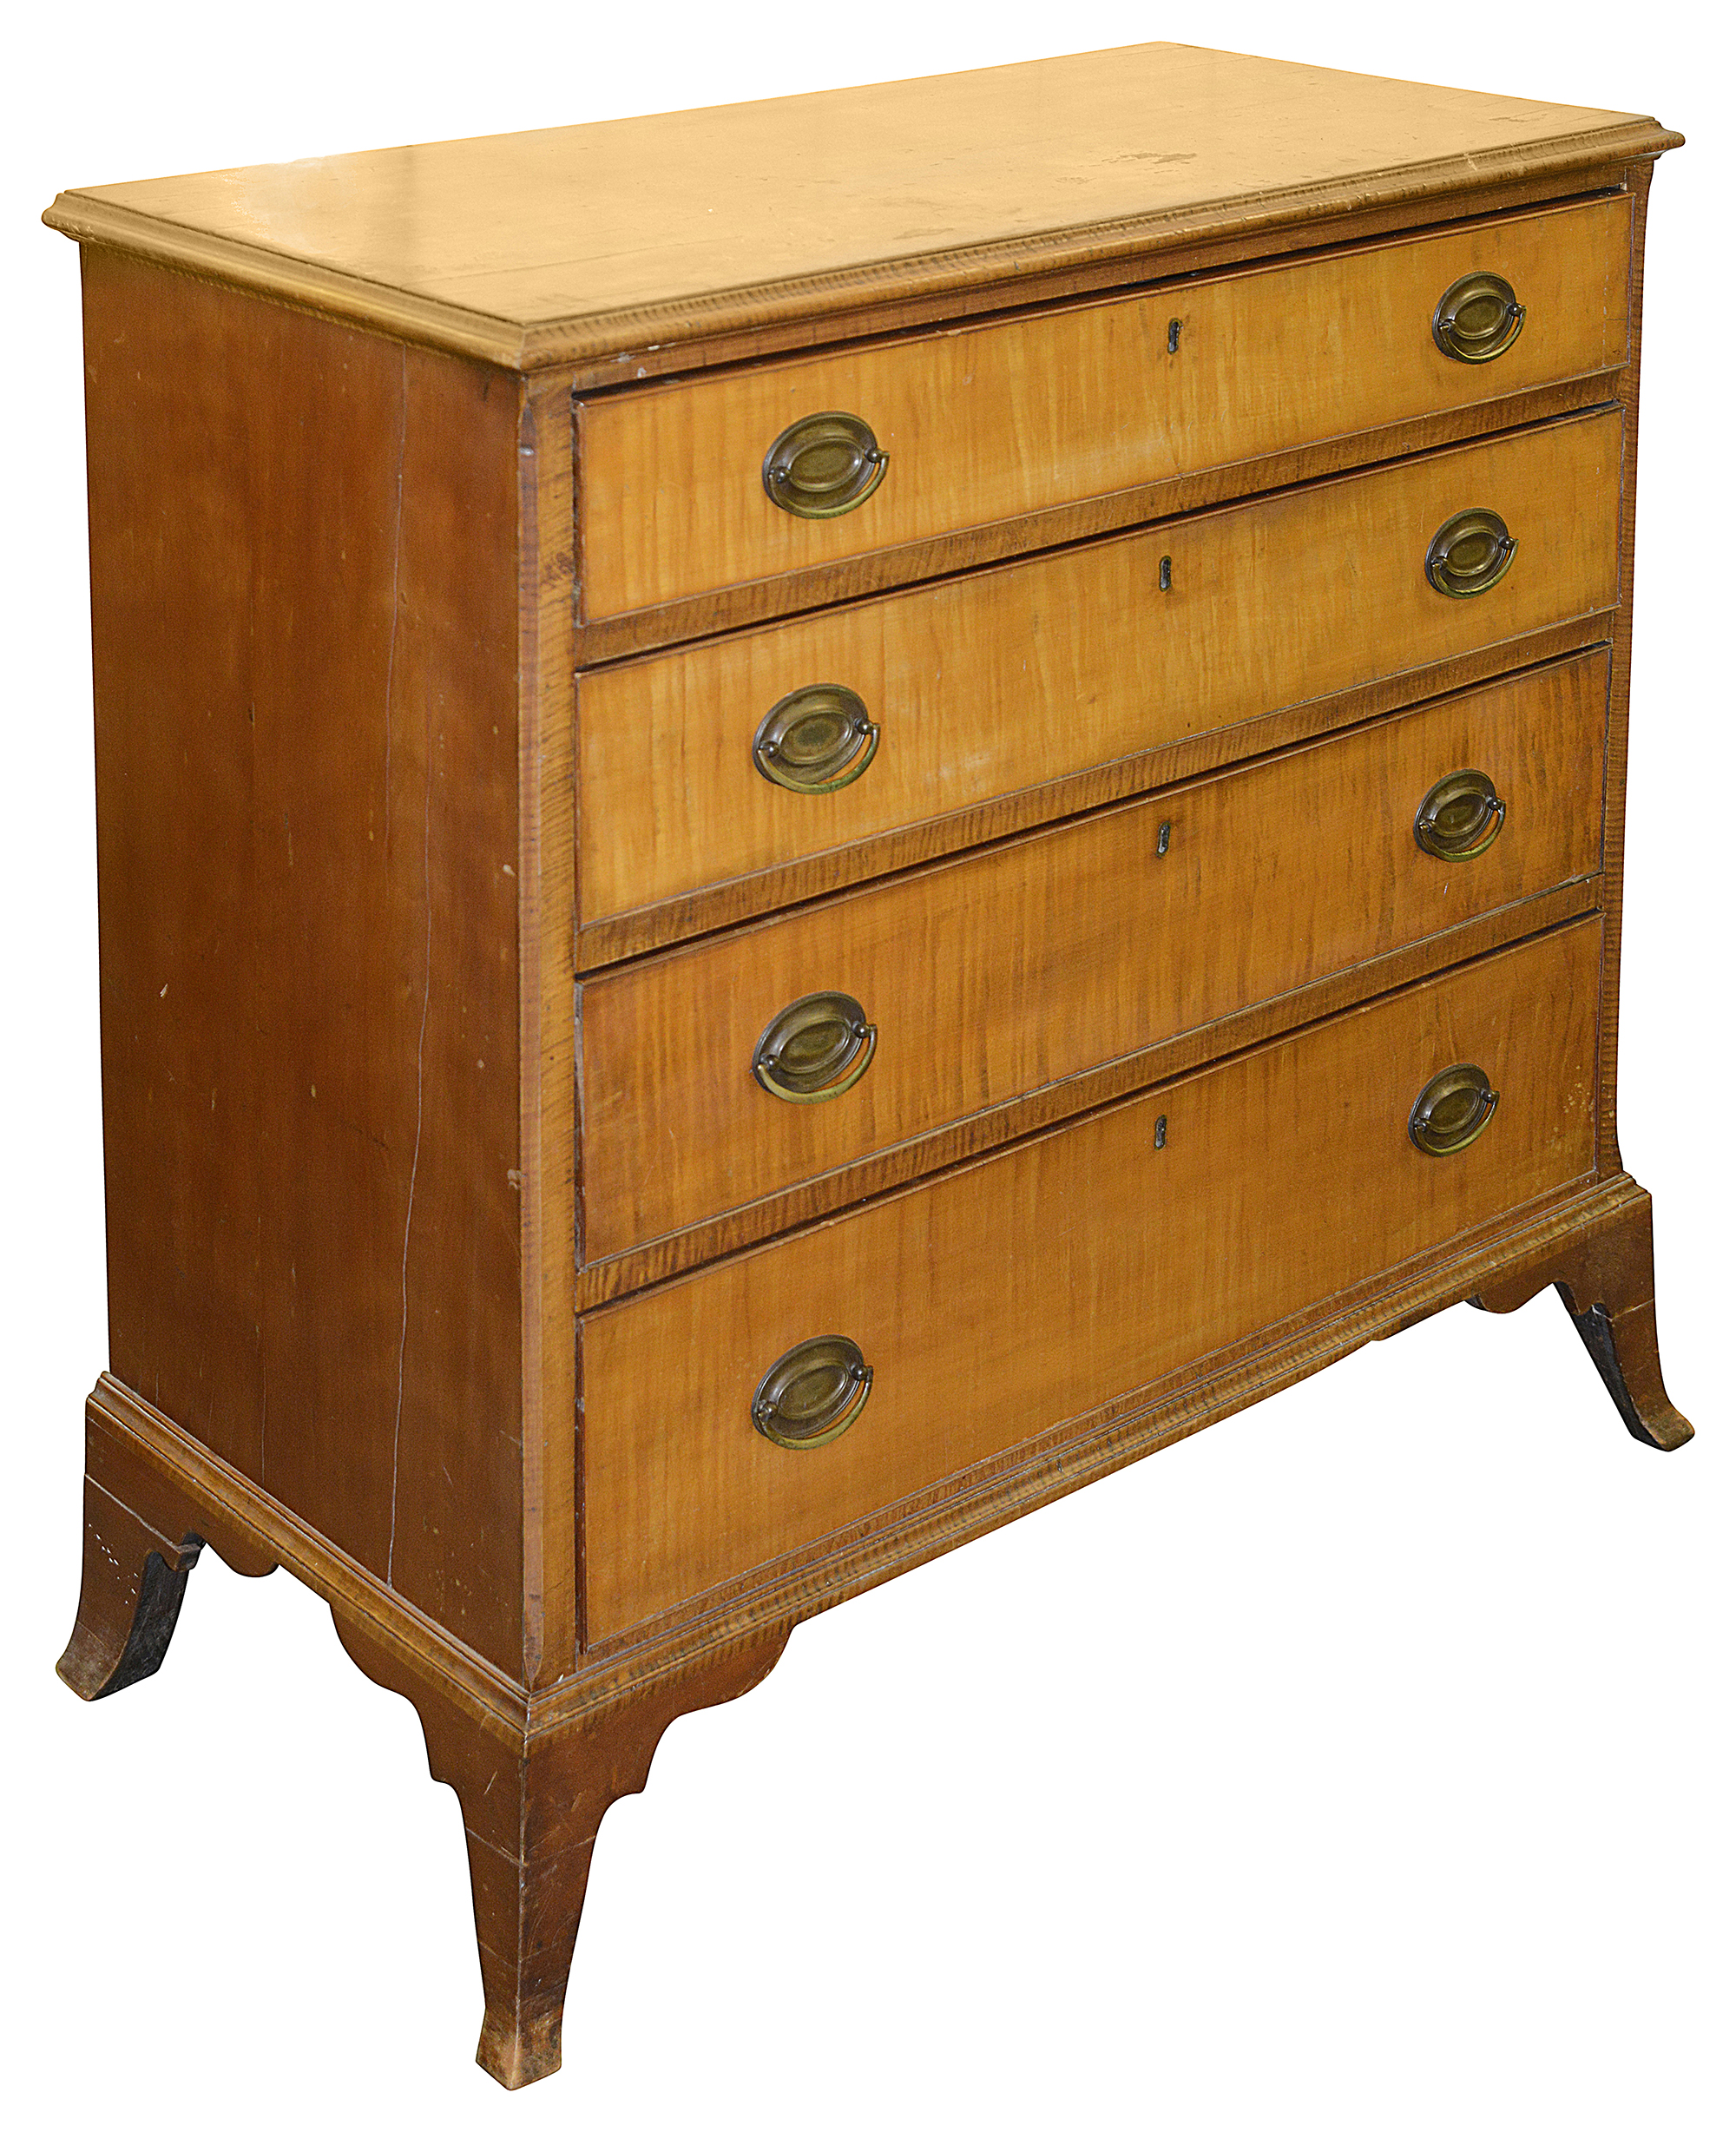 An American Federal period tiger maple chest of drawers - Image 2 of 5